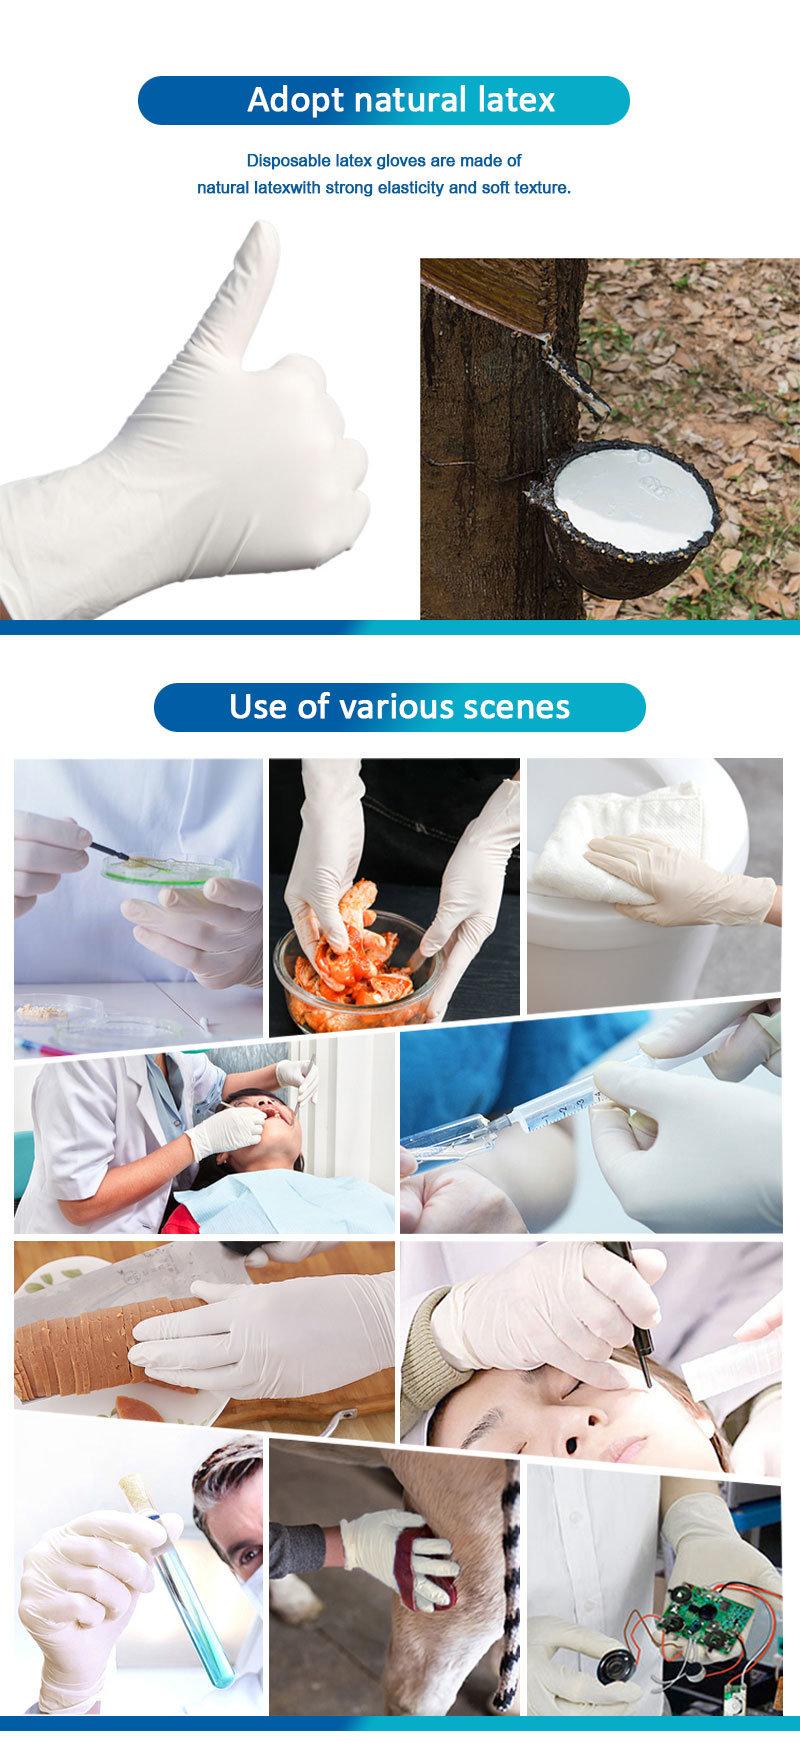 Powder Free Disposable Nitrile or Latex Gloves or Latex Gloves